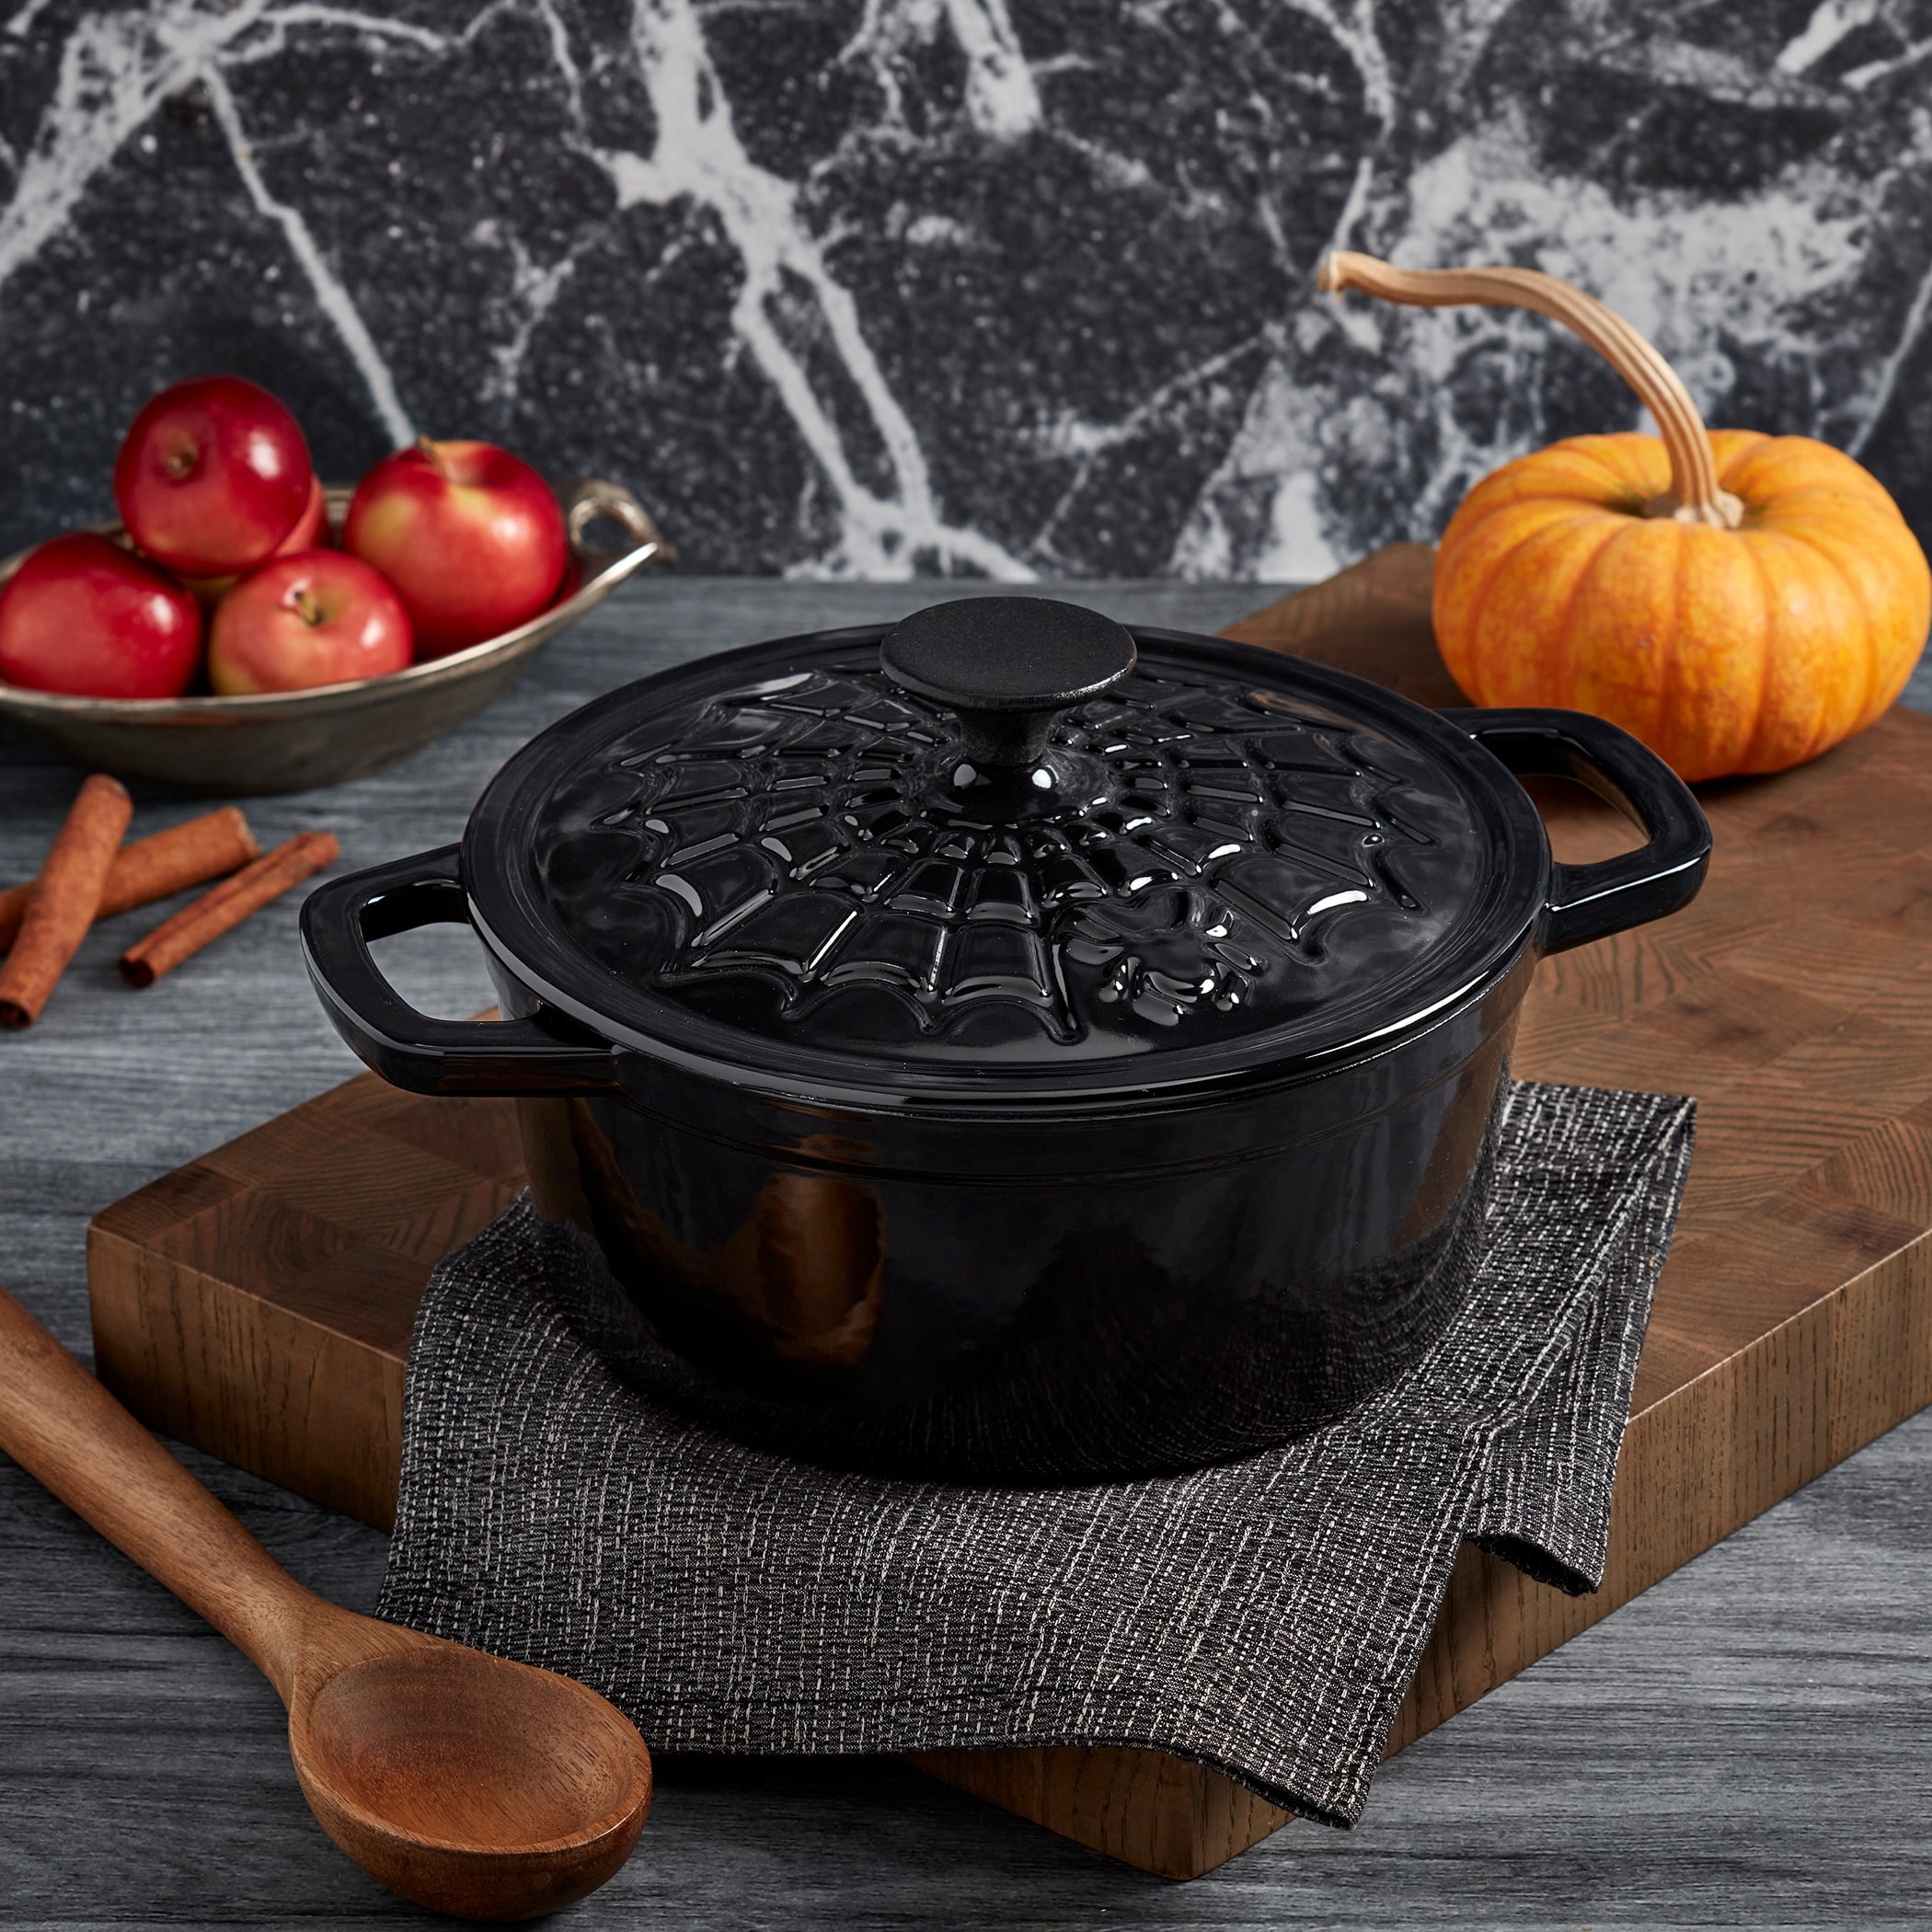 6 Quart Nonstick Aluminum Dutch Oven with Lid in Cherry - Bed Bath & Beyond  - 37451860